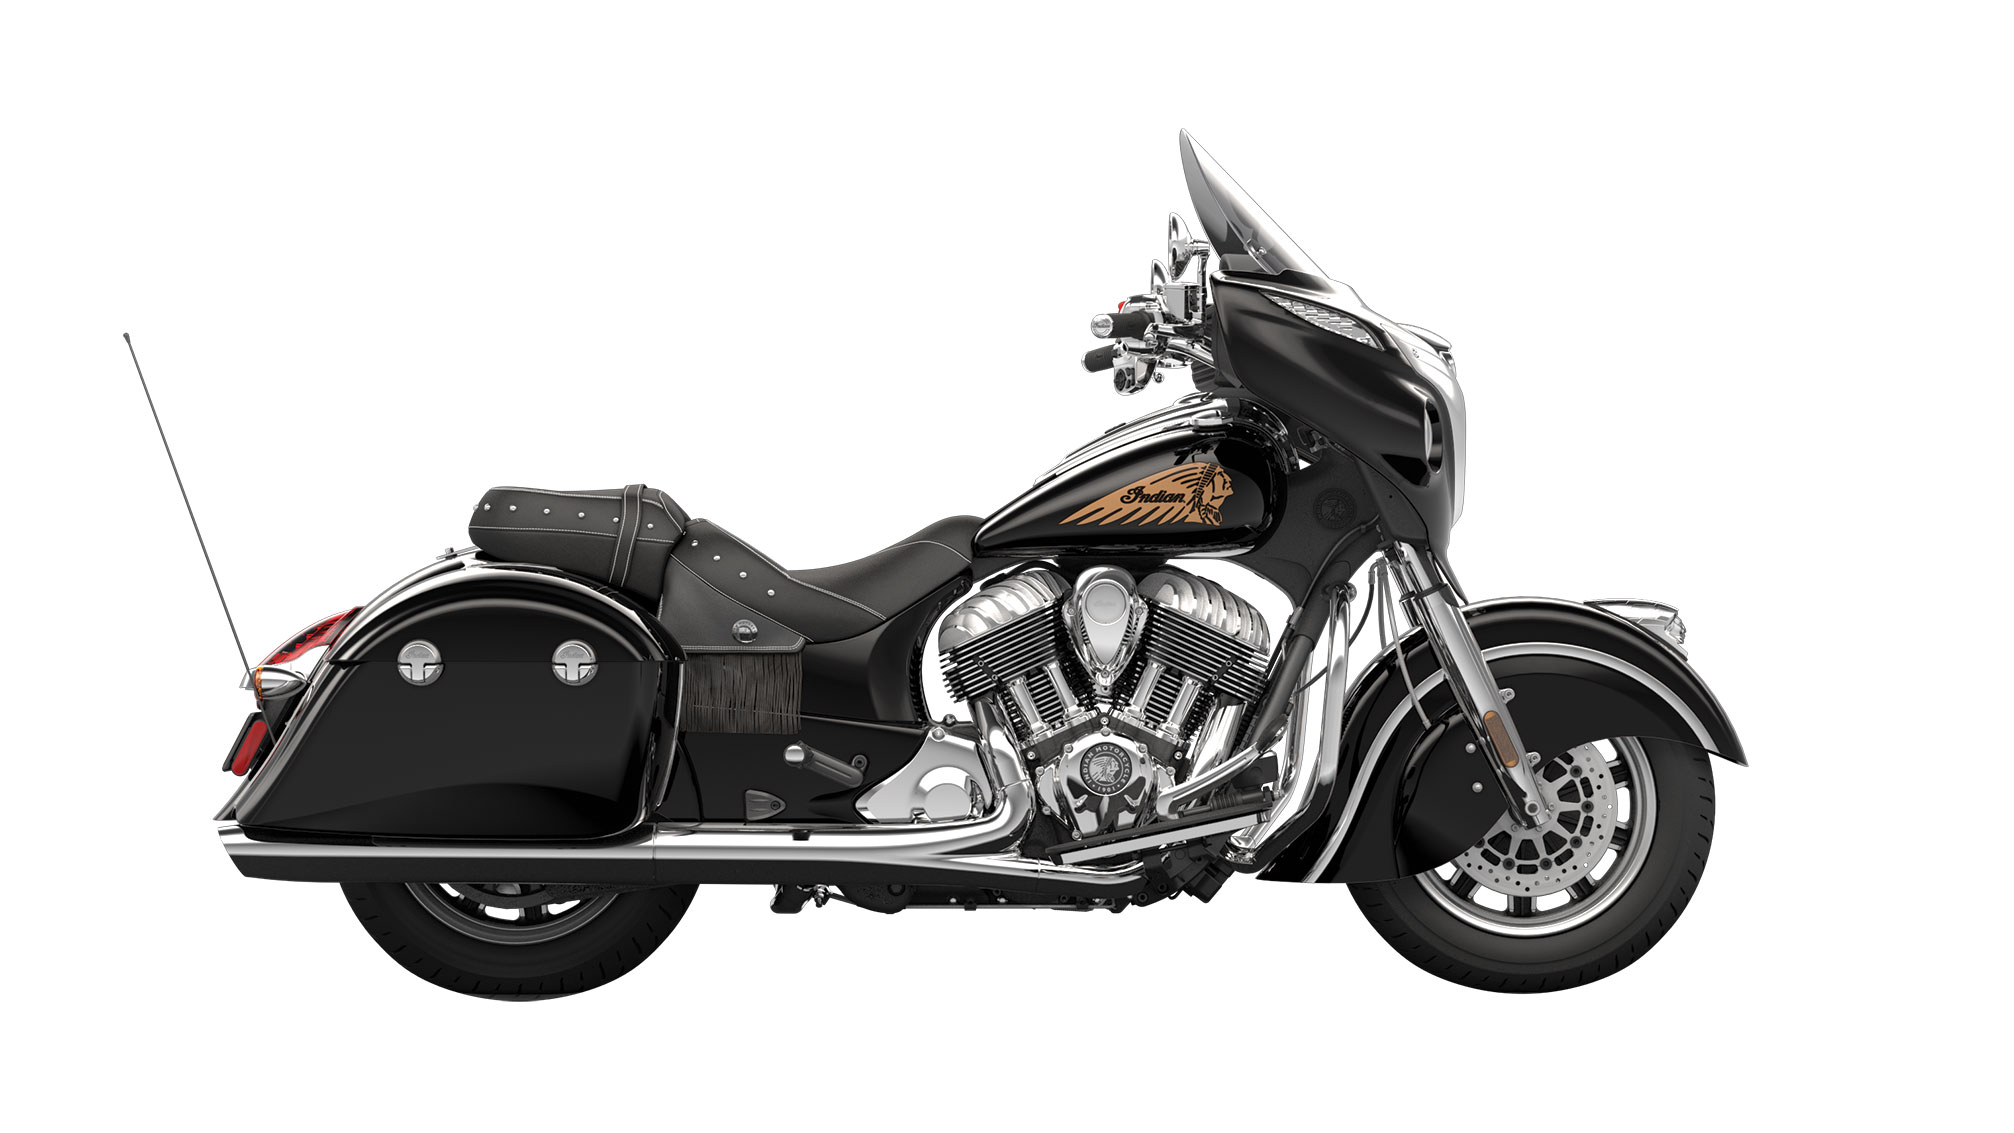 Indian Chieftain Re